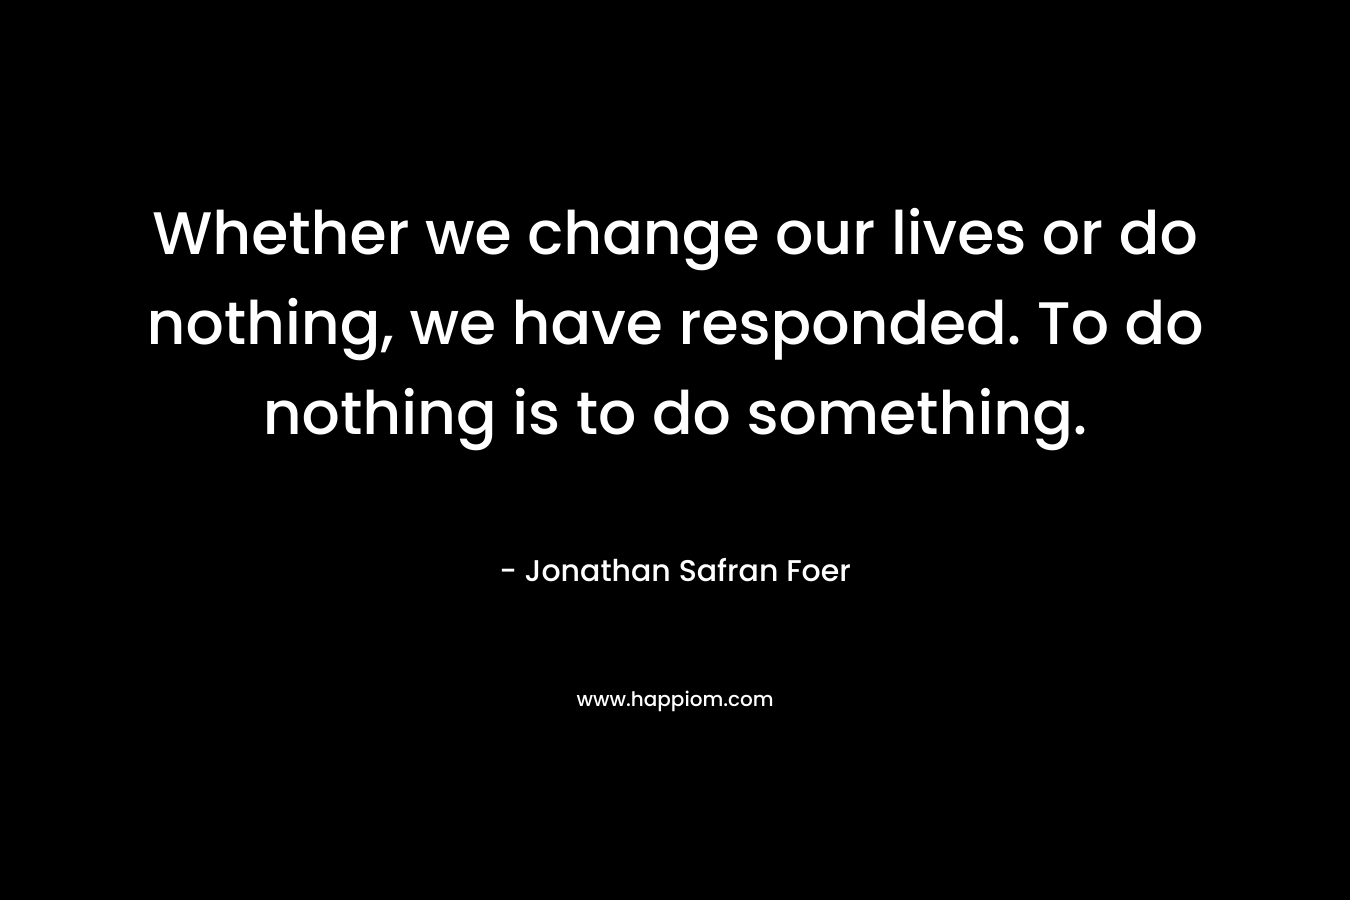 Whether we change our lives or do nothing, we have responded. To do nothing is to do something.